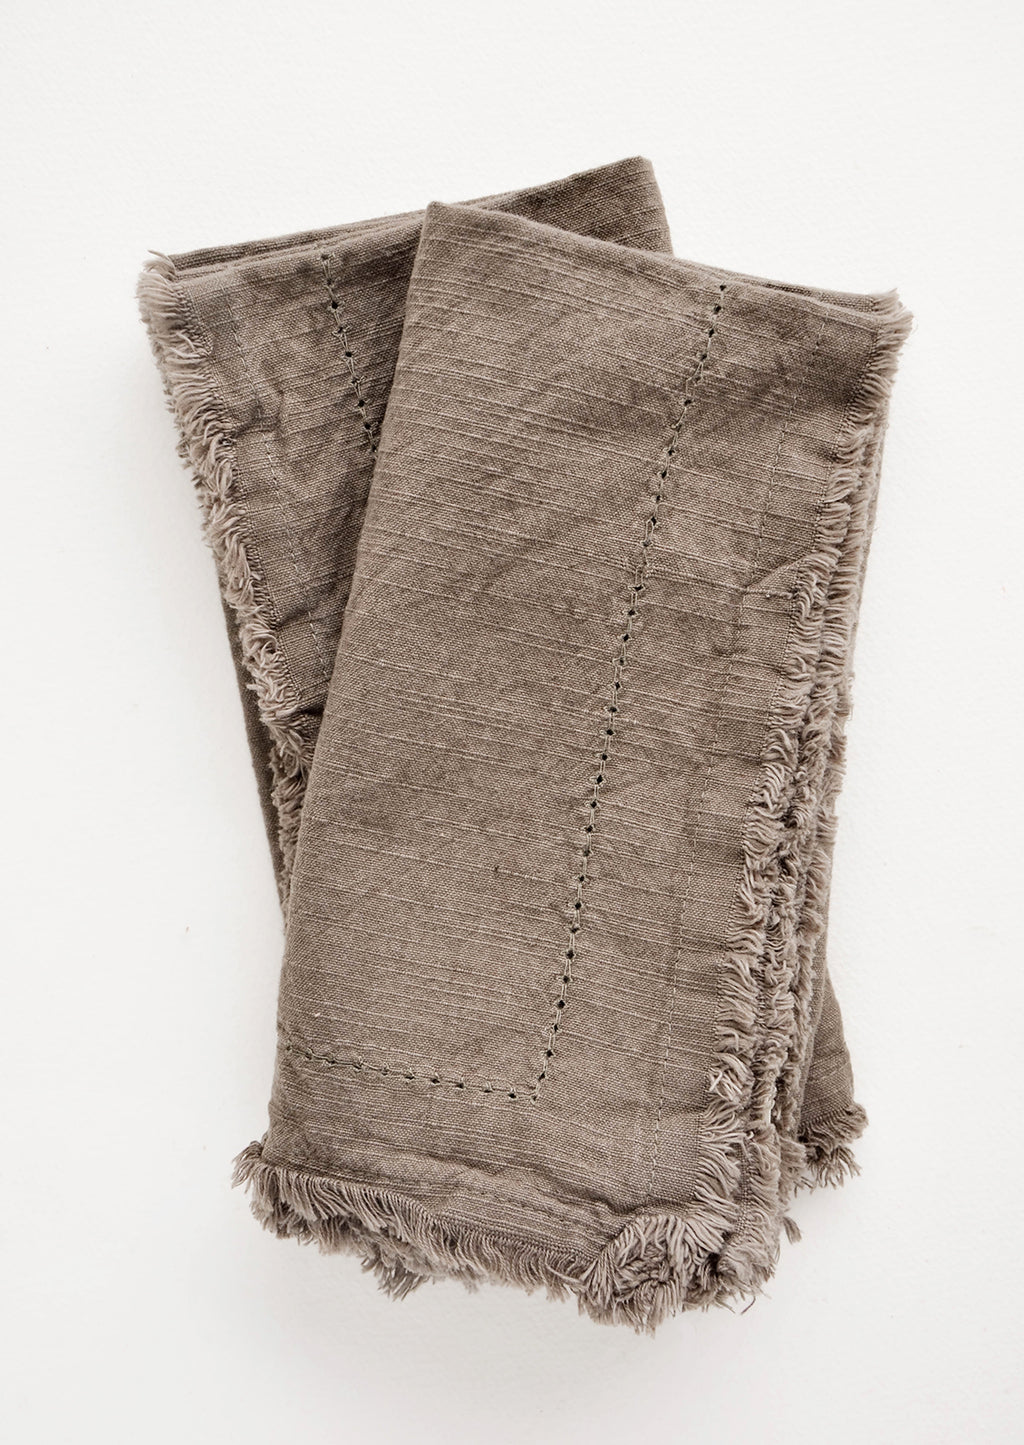 Fatigue: Two folded brown Cotton Napkins with frayed edges .